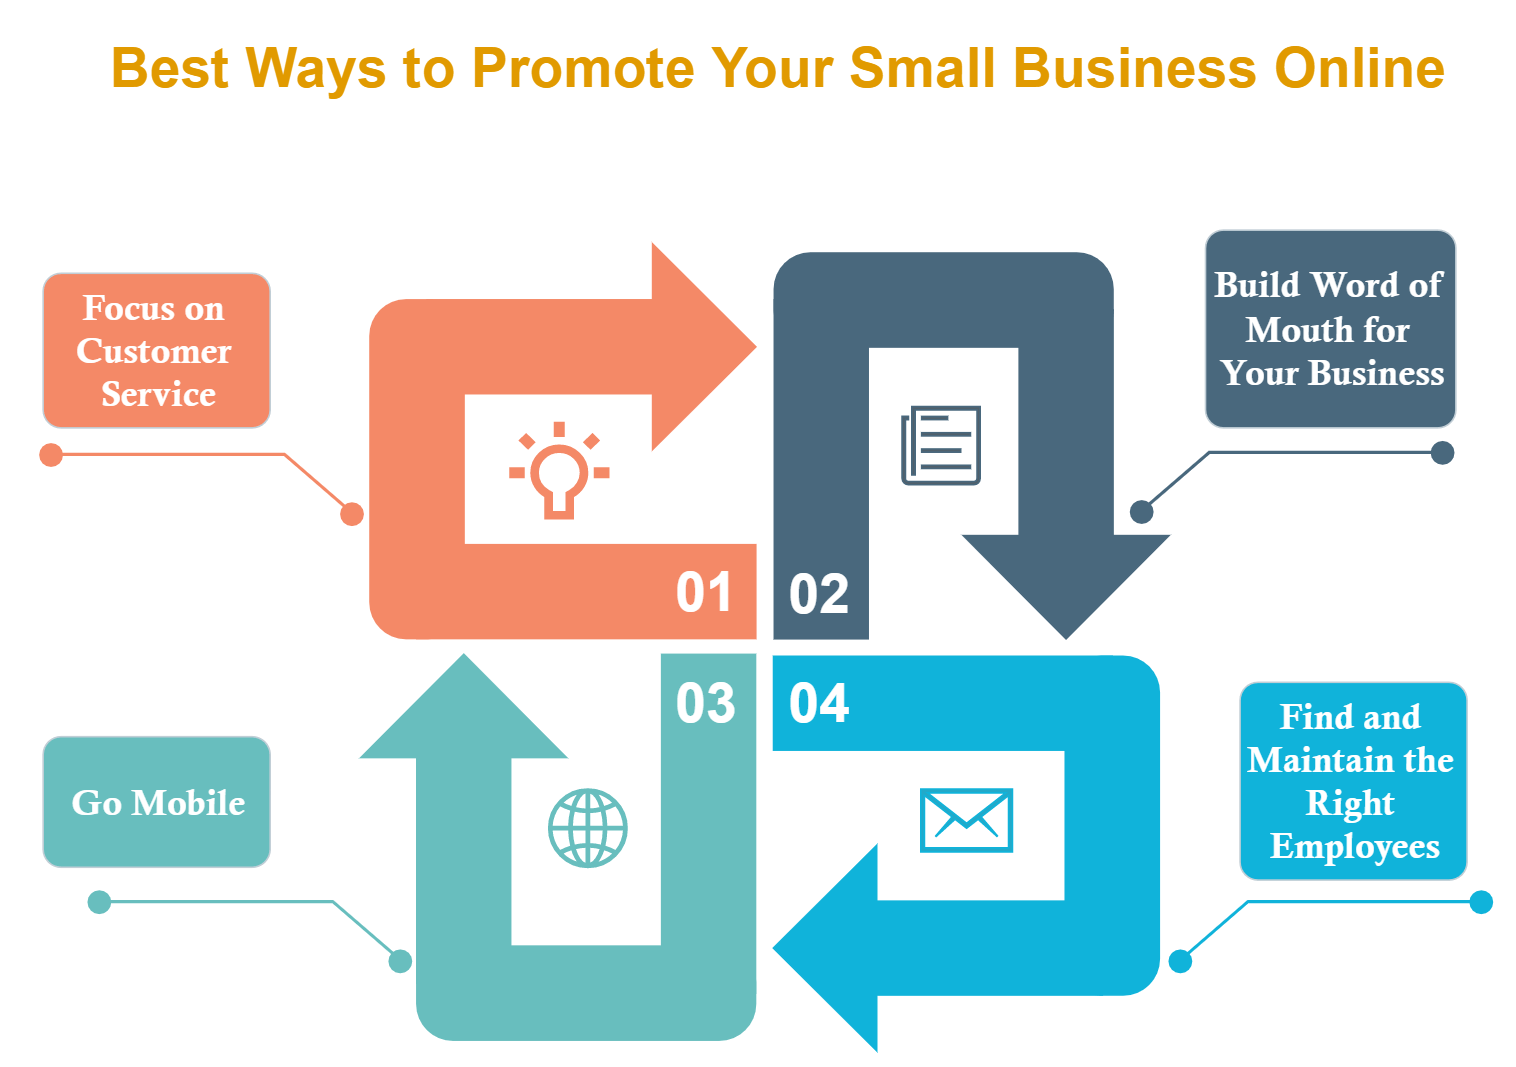 Best Ways to Promote Small Business Online